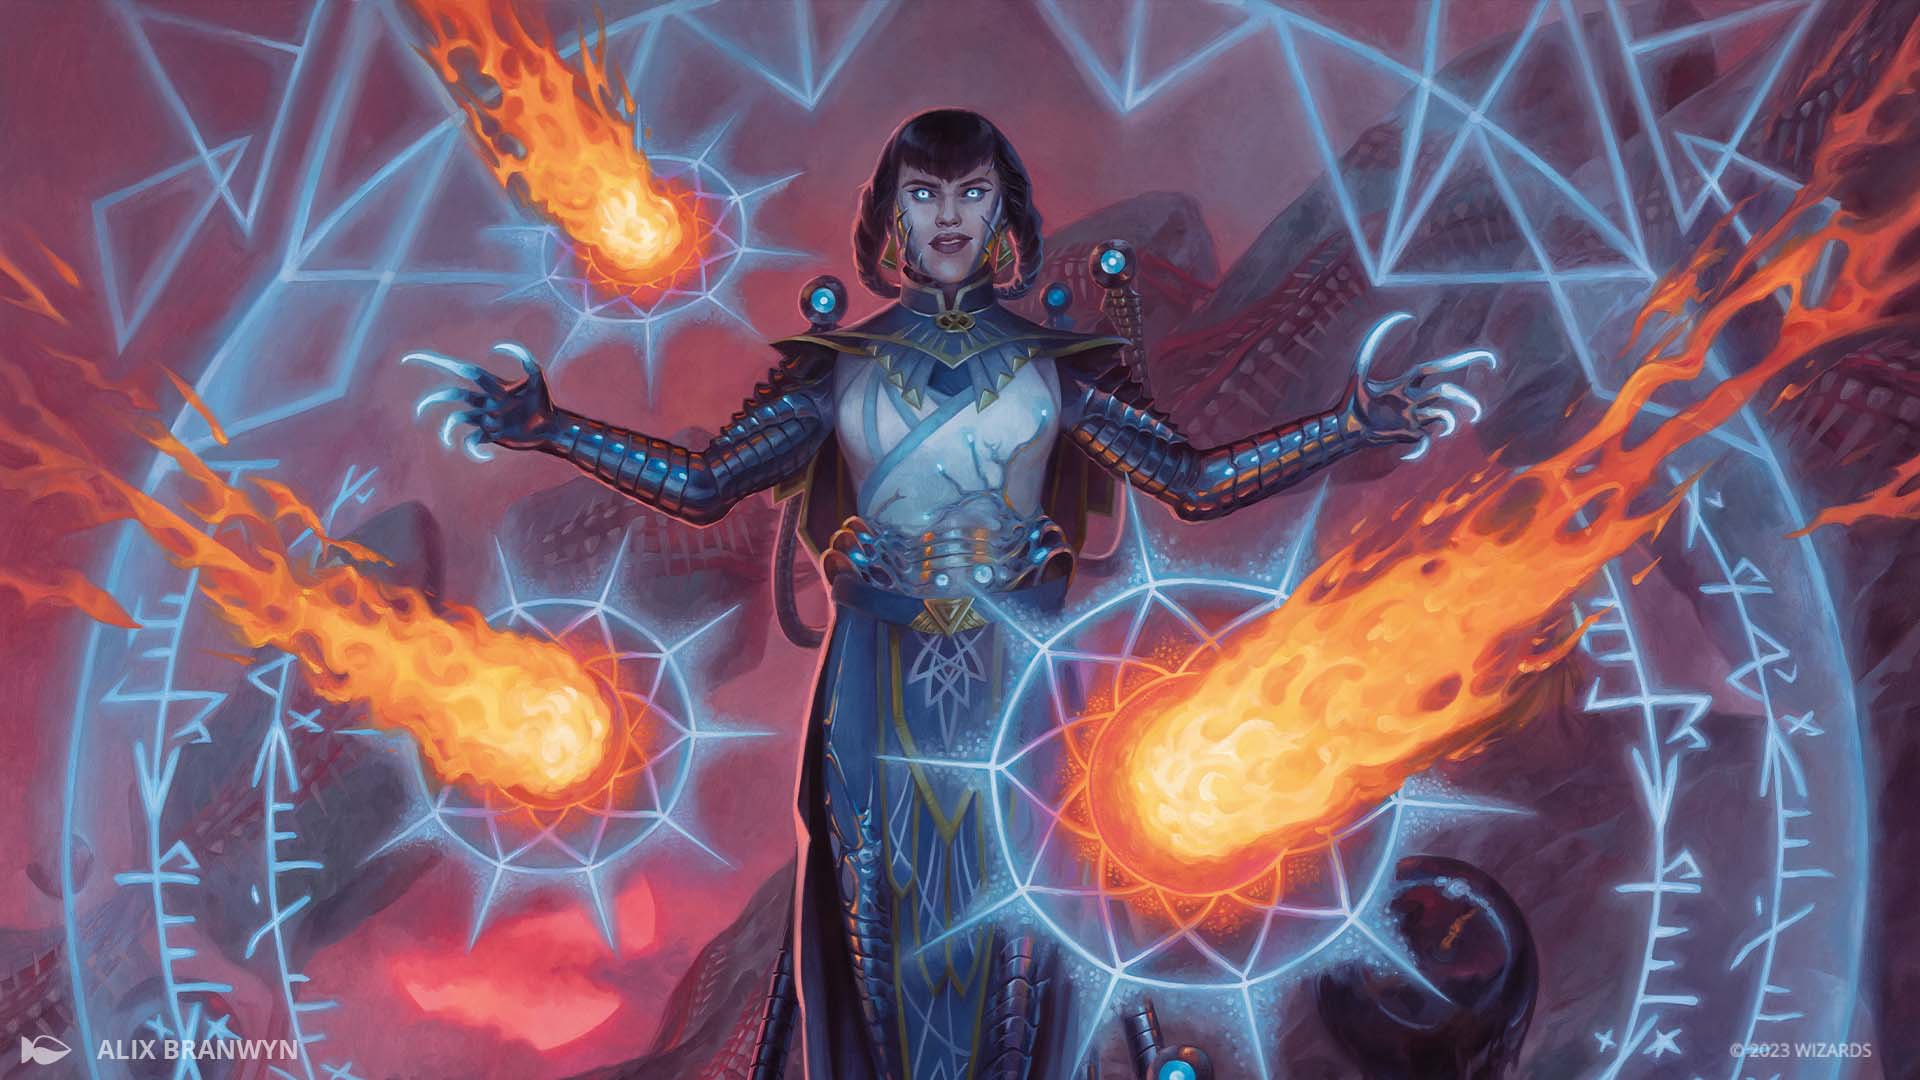 Modern Metagame Breakdown March 24th 2022